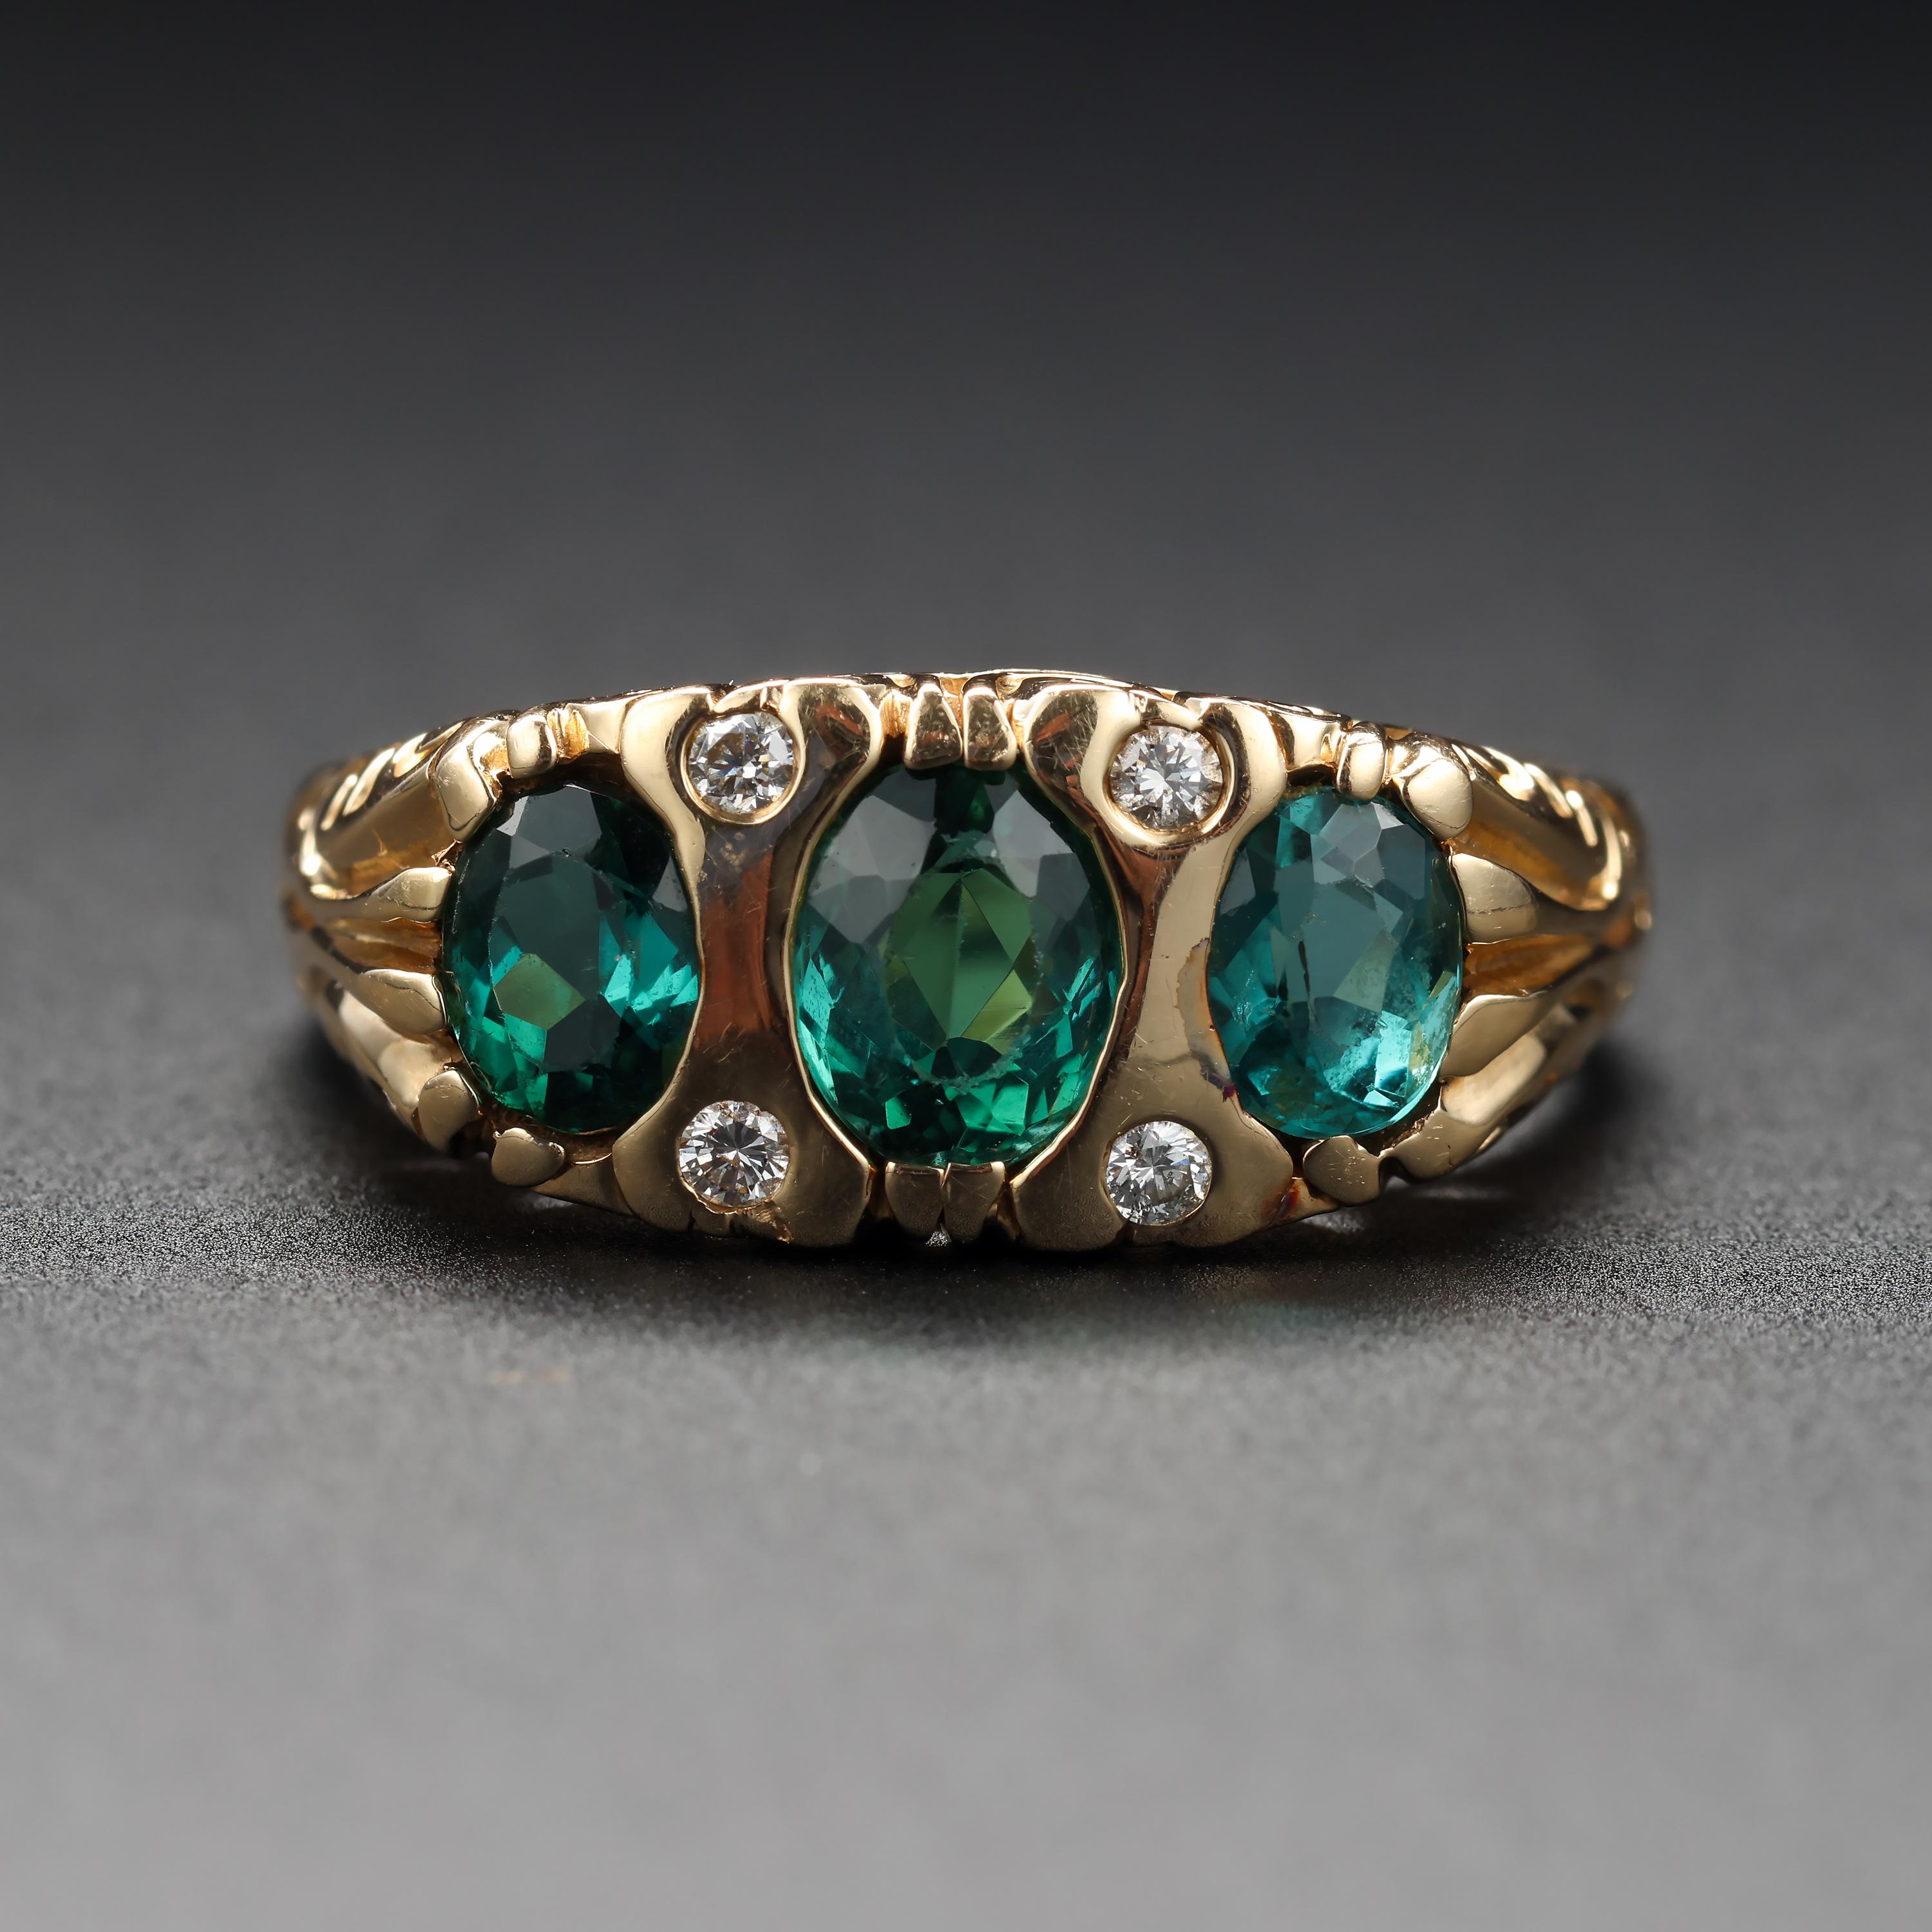 This handsome, classic three-stone tourmaline ring has lovely scrollwork on the face and shoulders but its Victorian good looks are vintage rather than antique, as the ring dates to the latter part of the previous century -circa 1980s, 1990s.